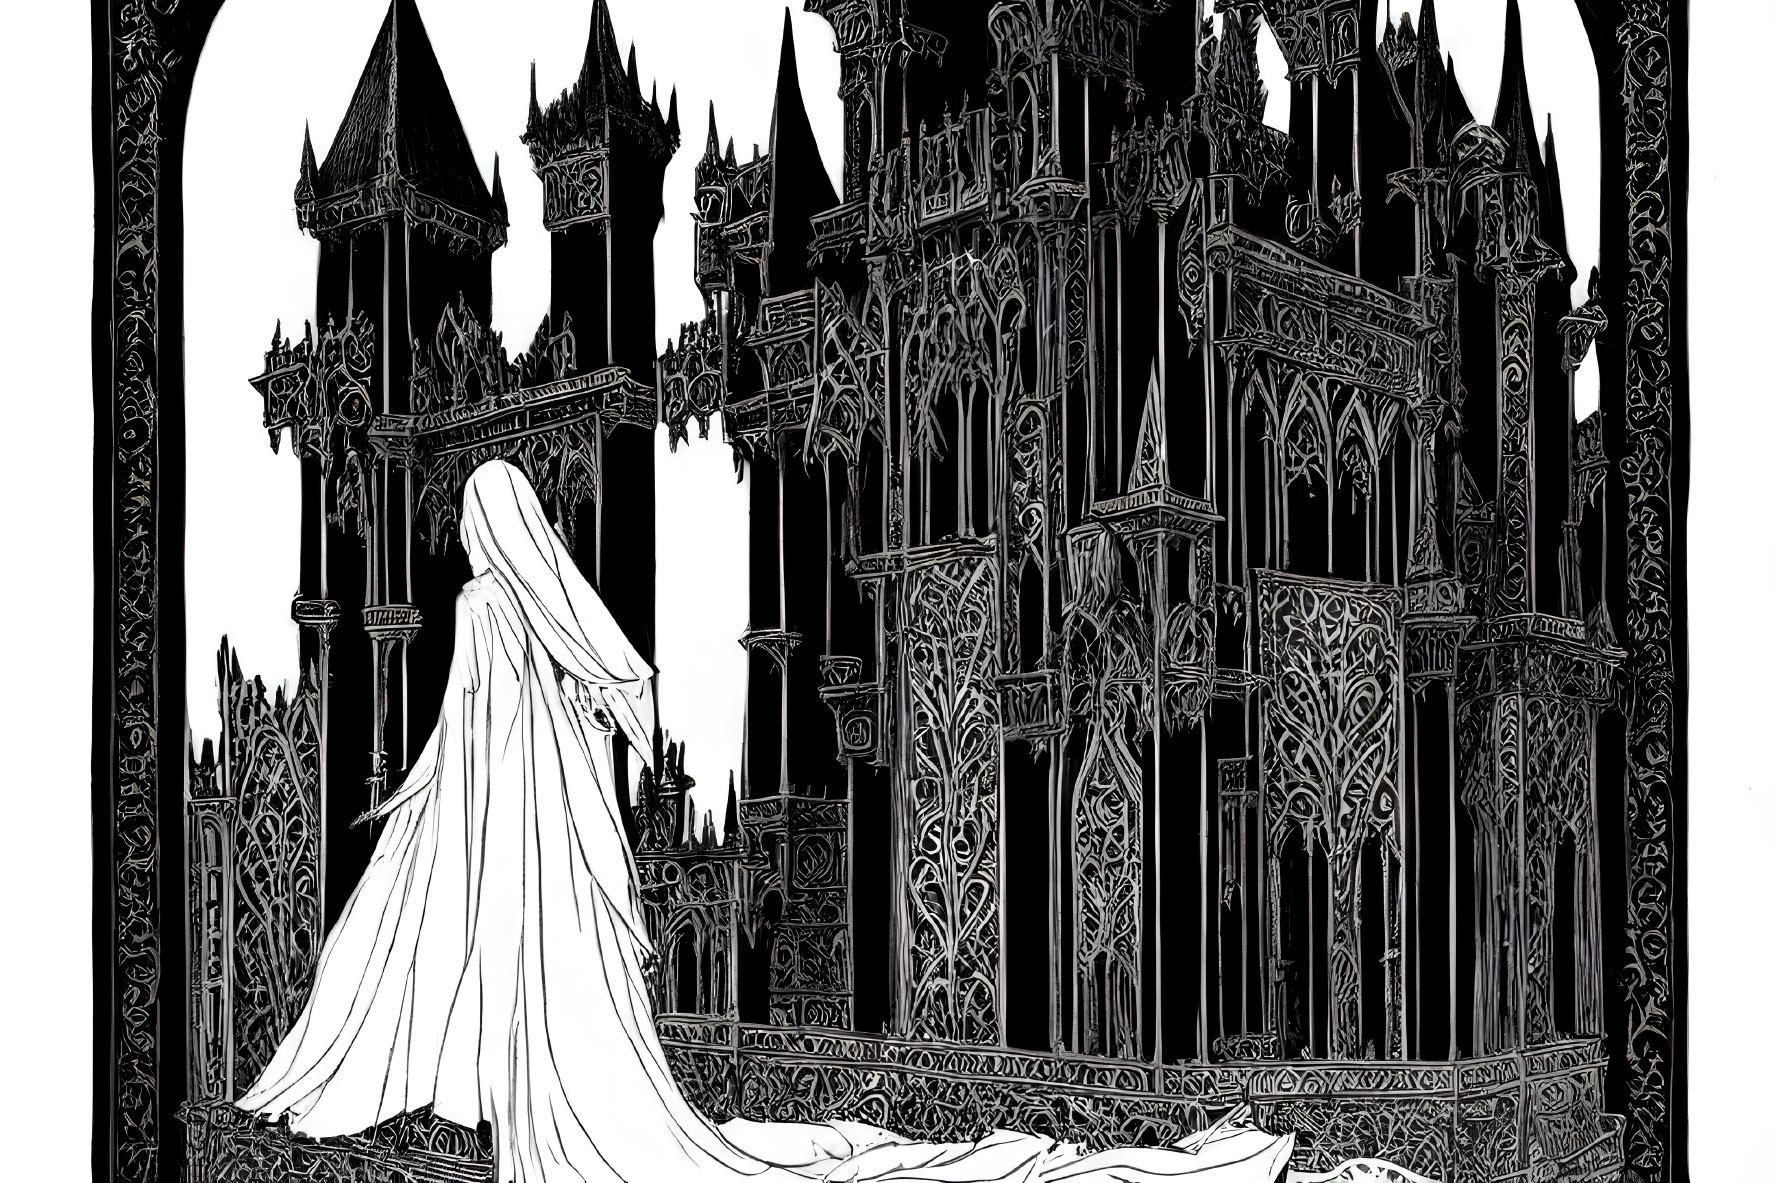 Monochrome illustration of veiled figure in flowing gown at gothic cathedral